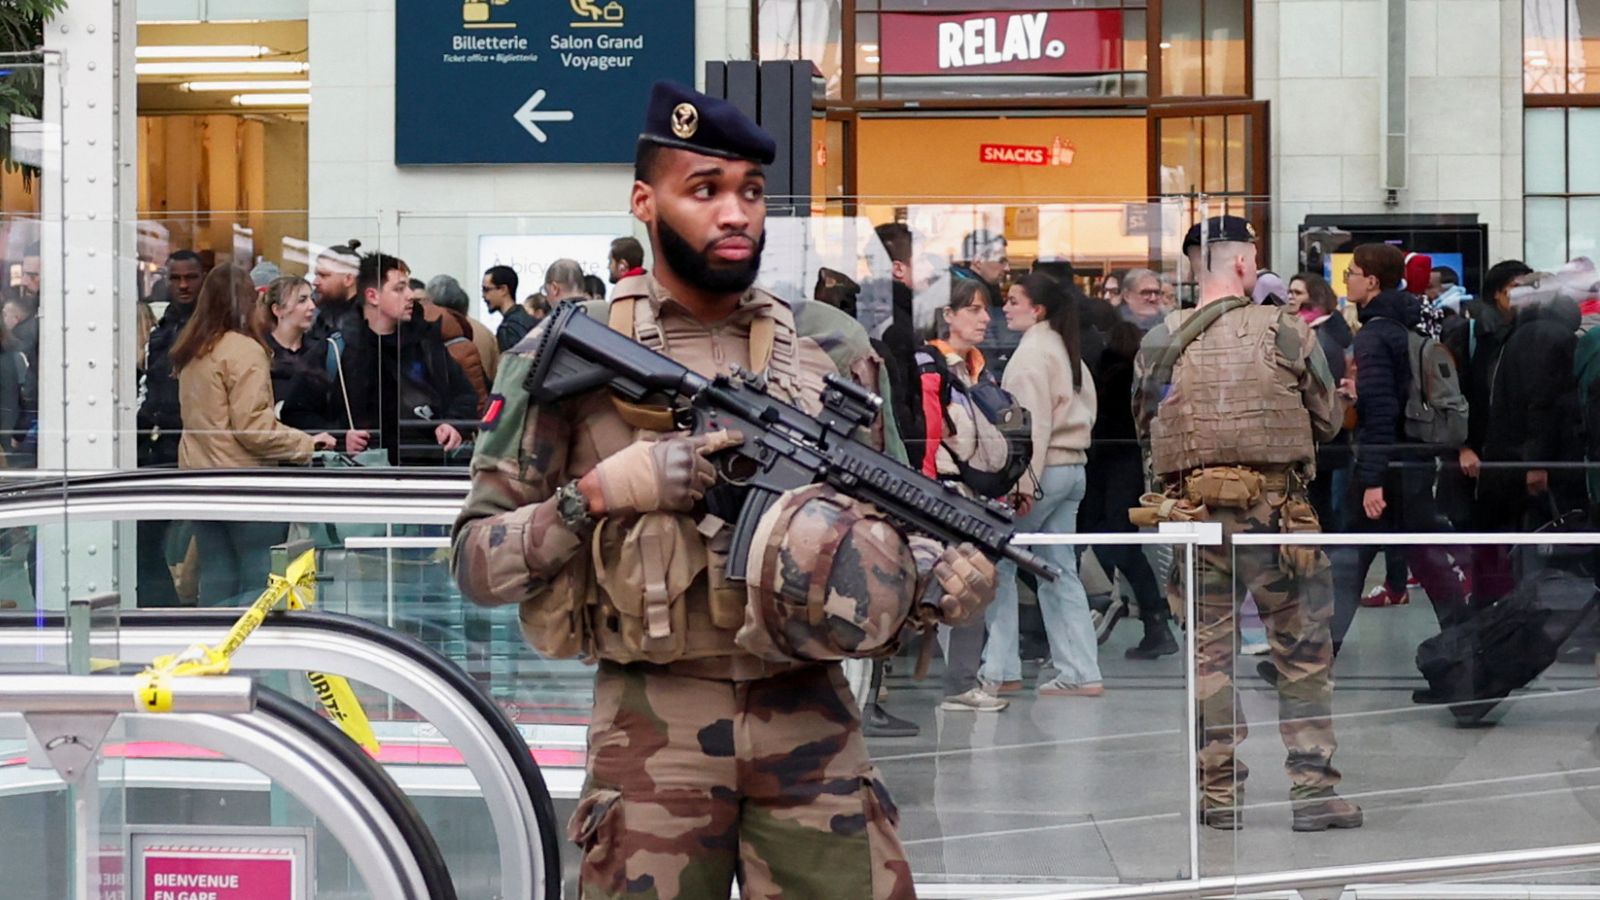 Three people injured in knife attack at Paris train station